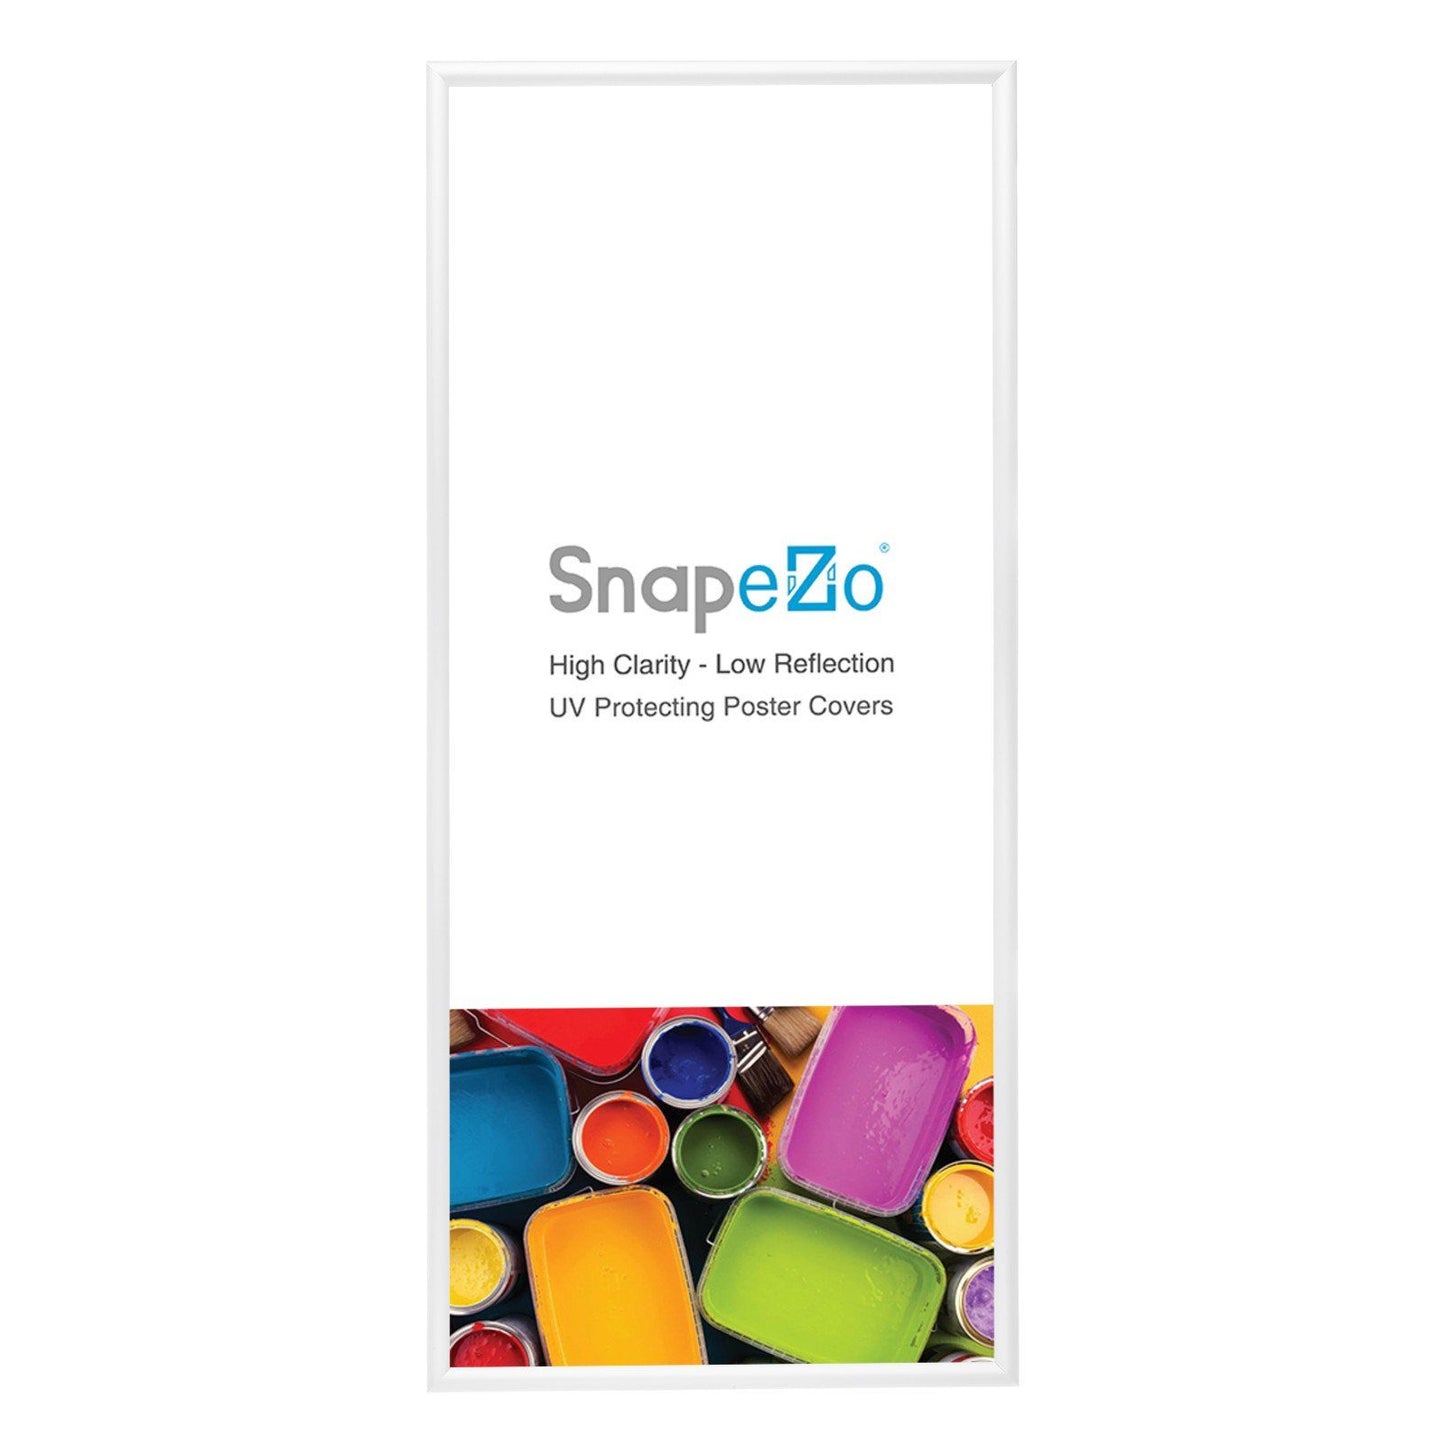 Load image into Gallery viewer, 11x24 White SnapeZo® Snap Frame - 1.2 Inch Profile
